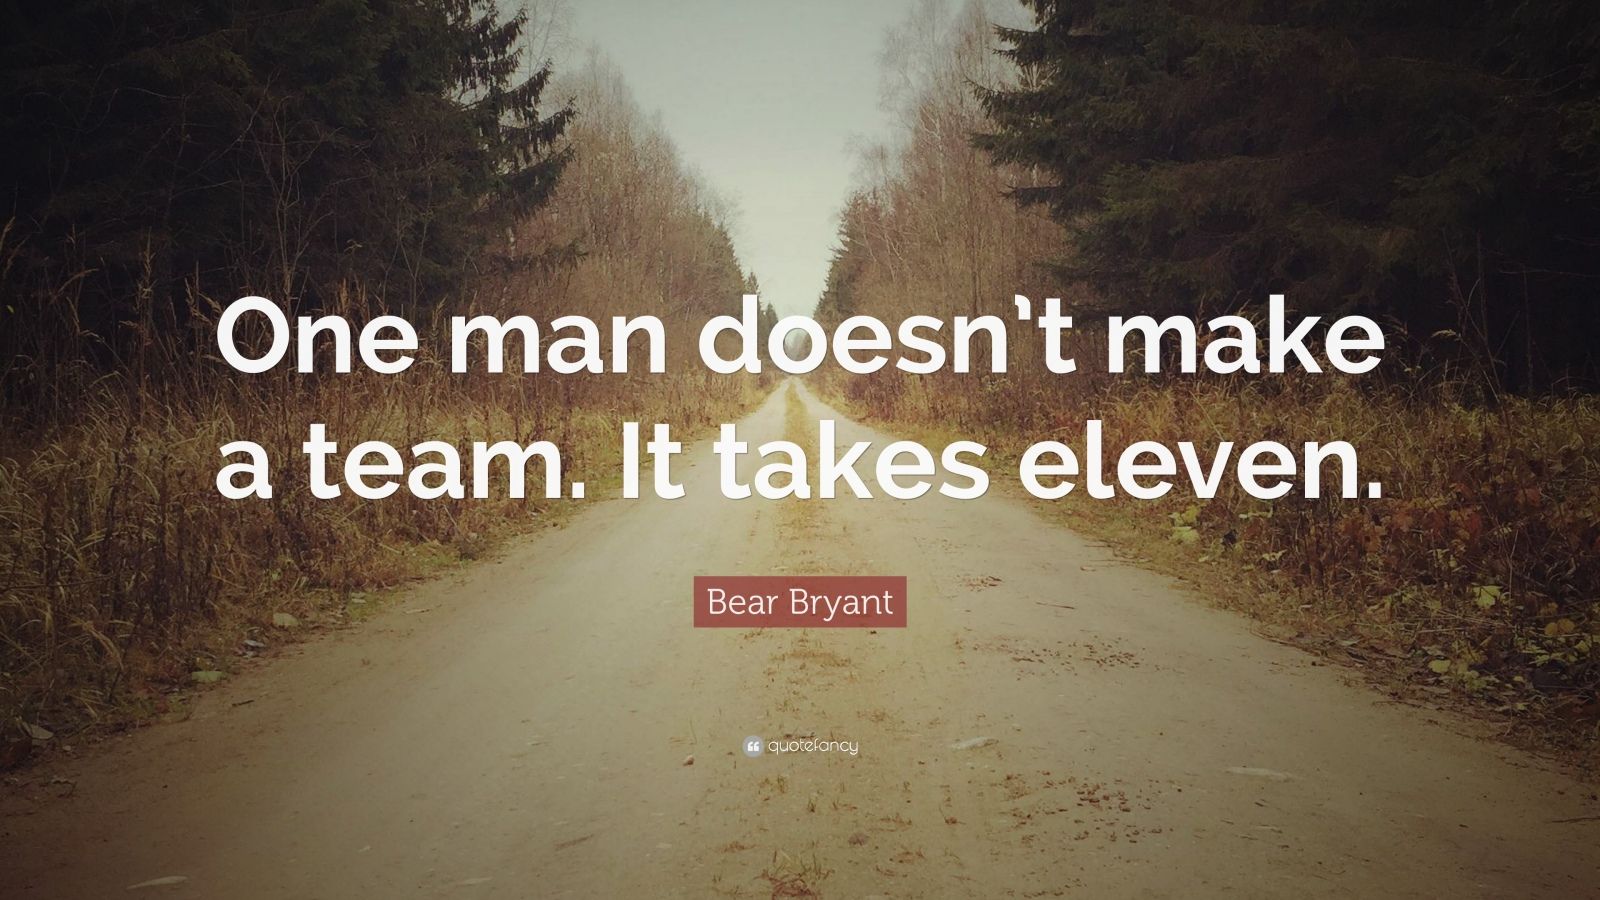 Top 120 Bear Bryant Quotes | 2021 Edition | Free Images - QuoteFancy